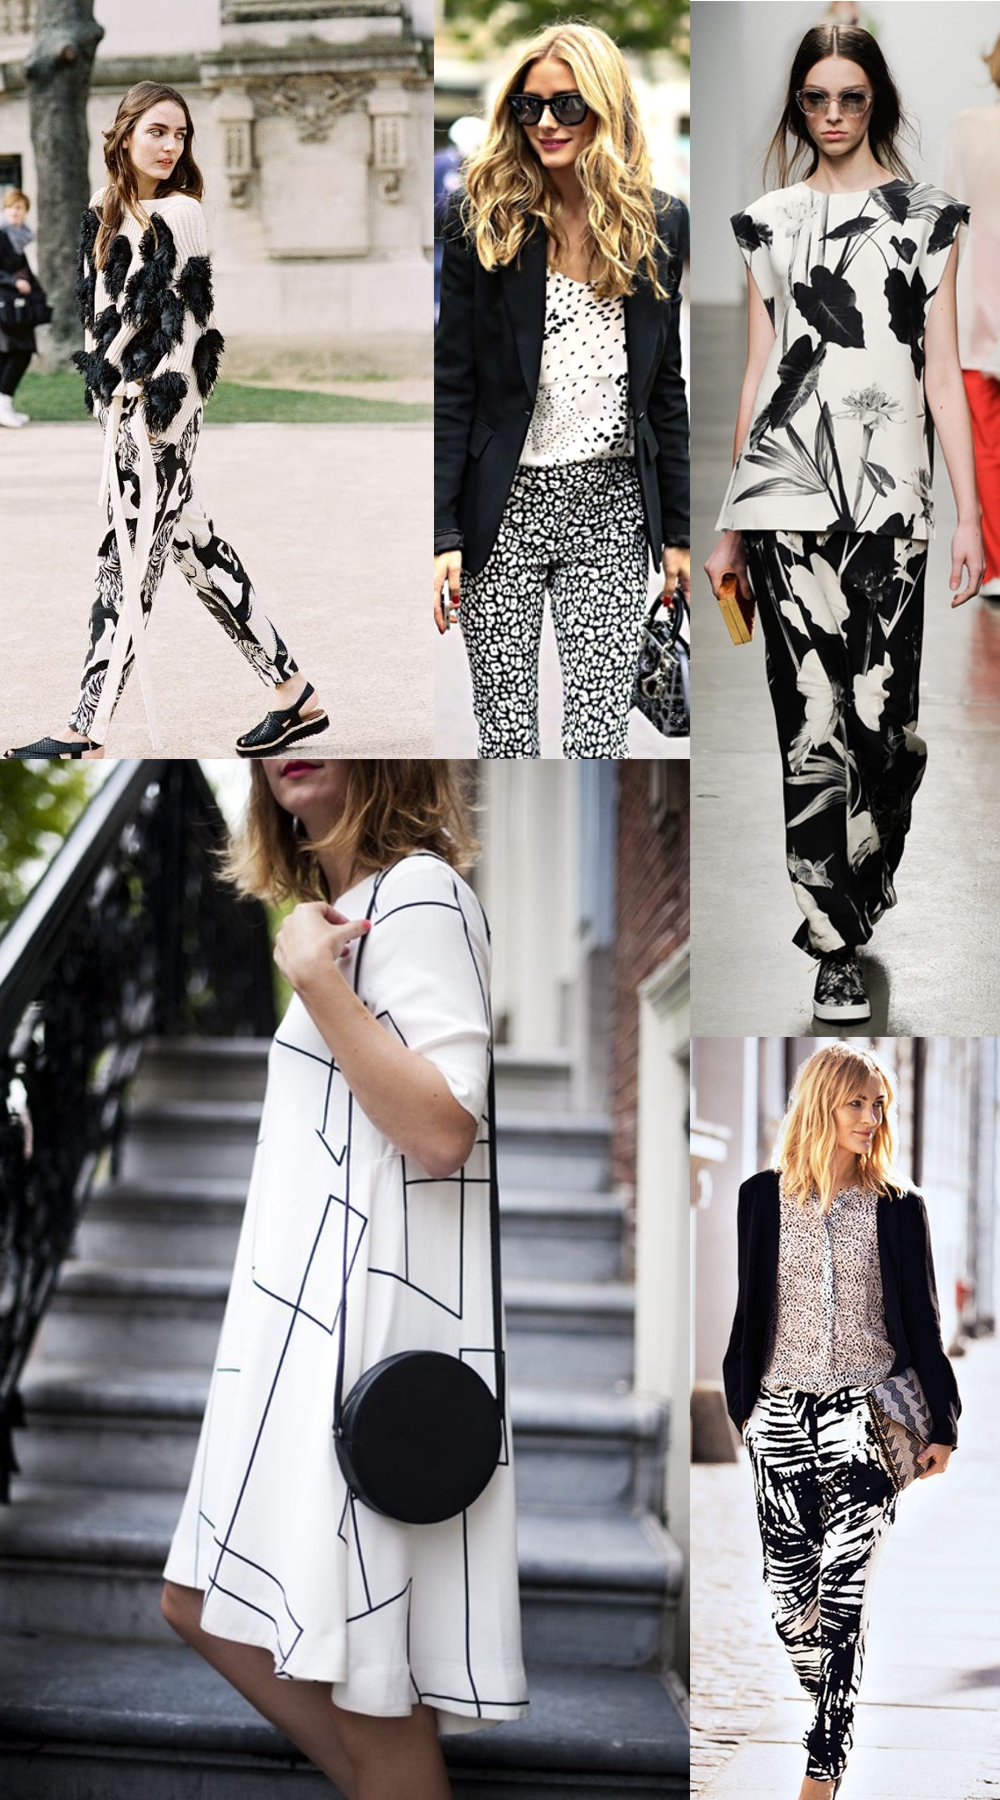 TREND: BLACK AND WHITE PRINTS